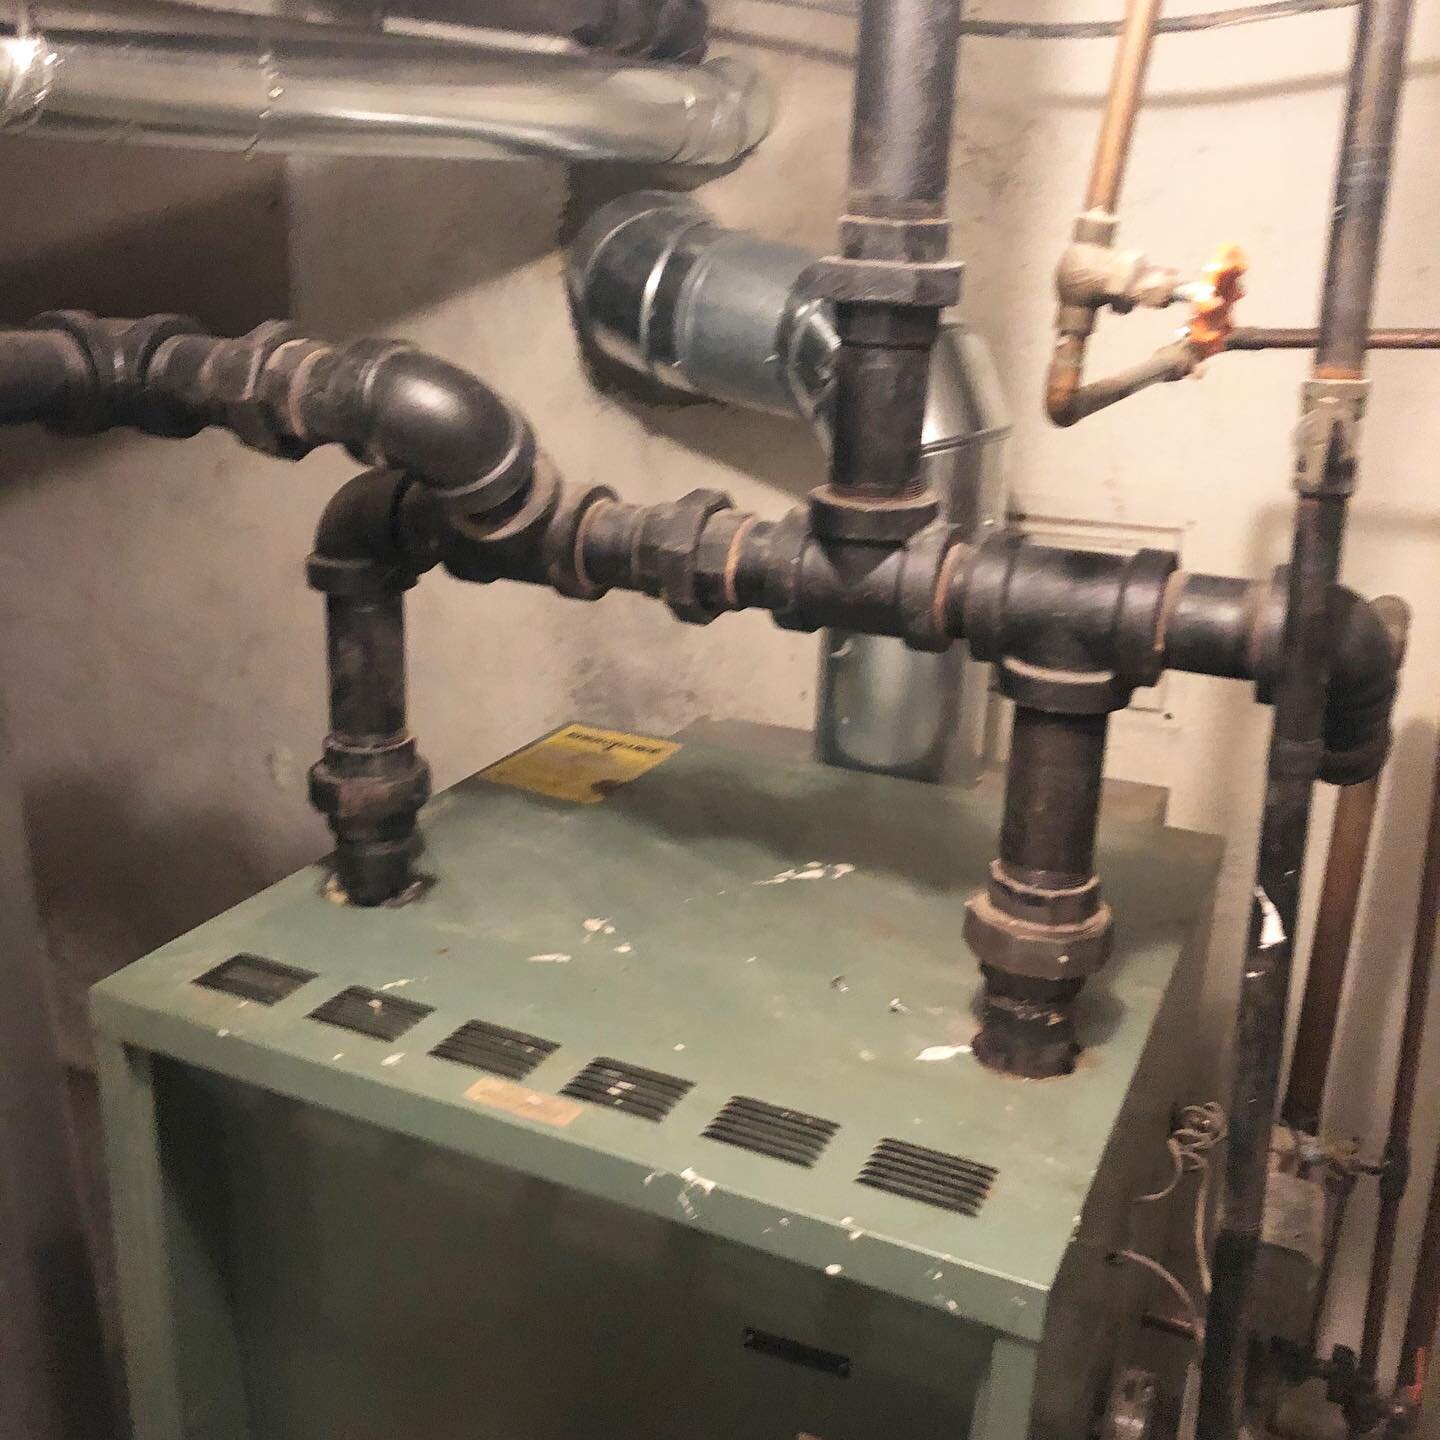 When heating problems present themself and your steam boiler needs replacing just call us! Before &amp; After ⬅️➡️ from one of this weeks Steam Boiler removal and installation projects.